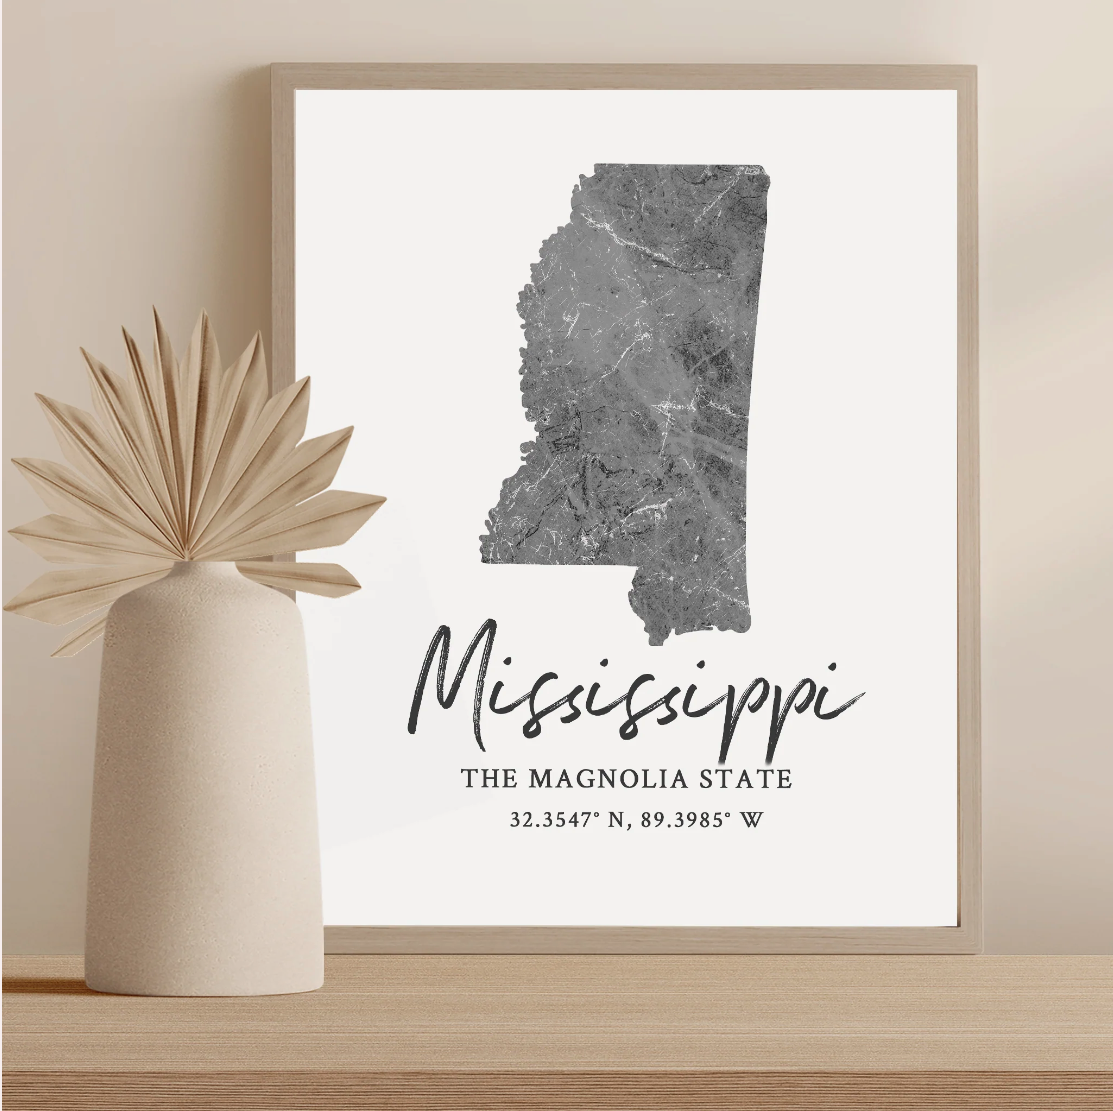 Mississippi State Map Silhouette print